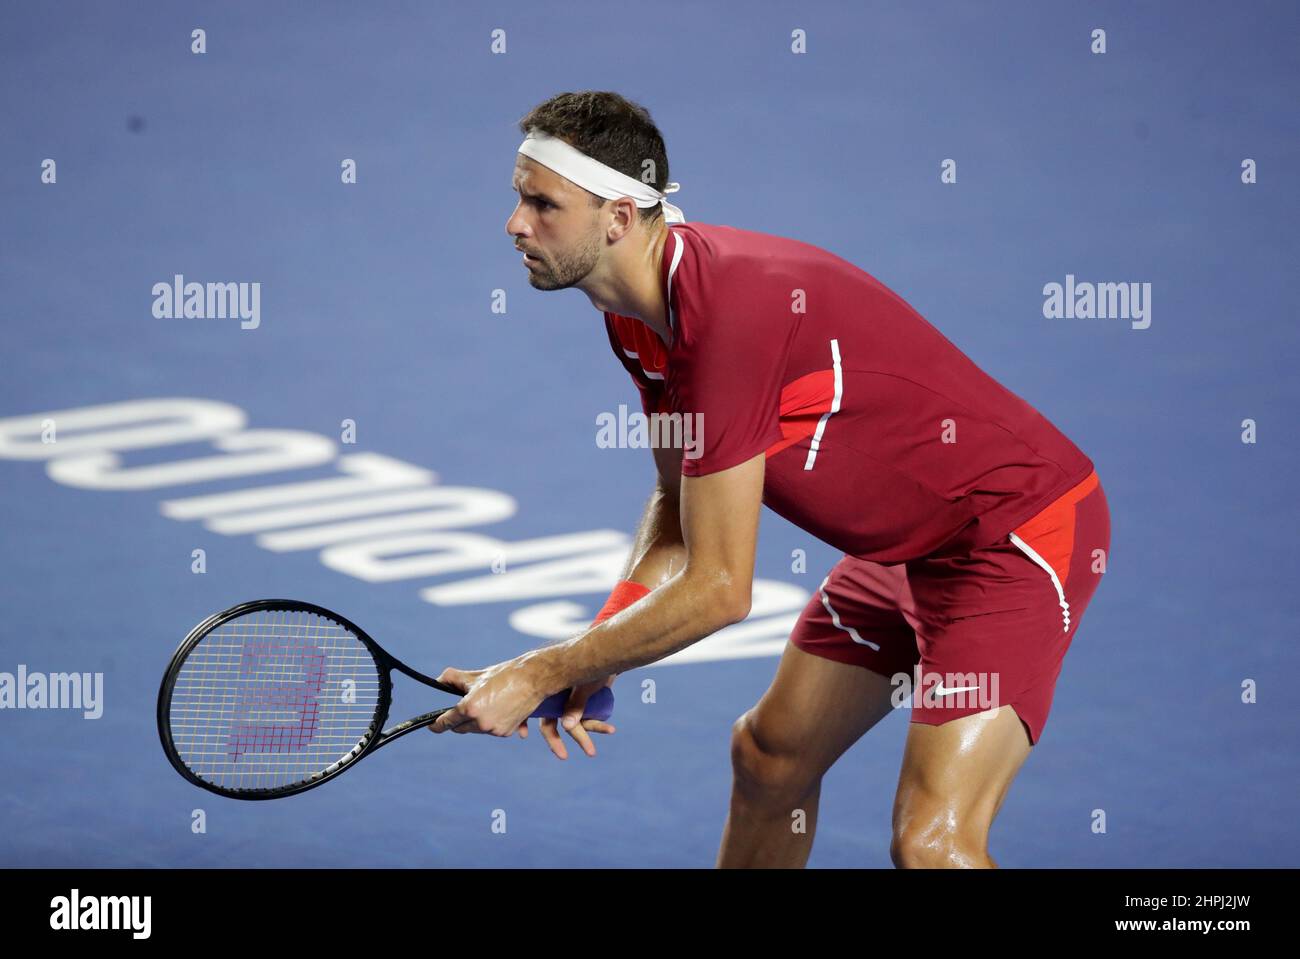 Tennis - ATP 500 - Abierto Mexicano - The Fairmont Acapulco Princess,  Acapulco, Mexico - February 21, 2022 Bulgaria's Grigor Dimitrov in action  during his match against Stefan Kozlov of the U.S. REUTERS/Henry Romero  Stock Photo - Alamy